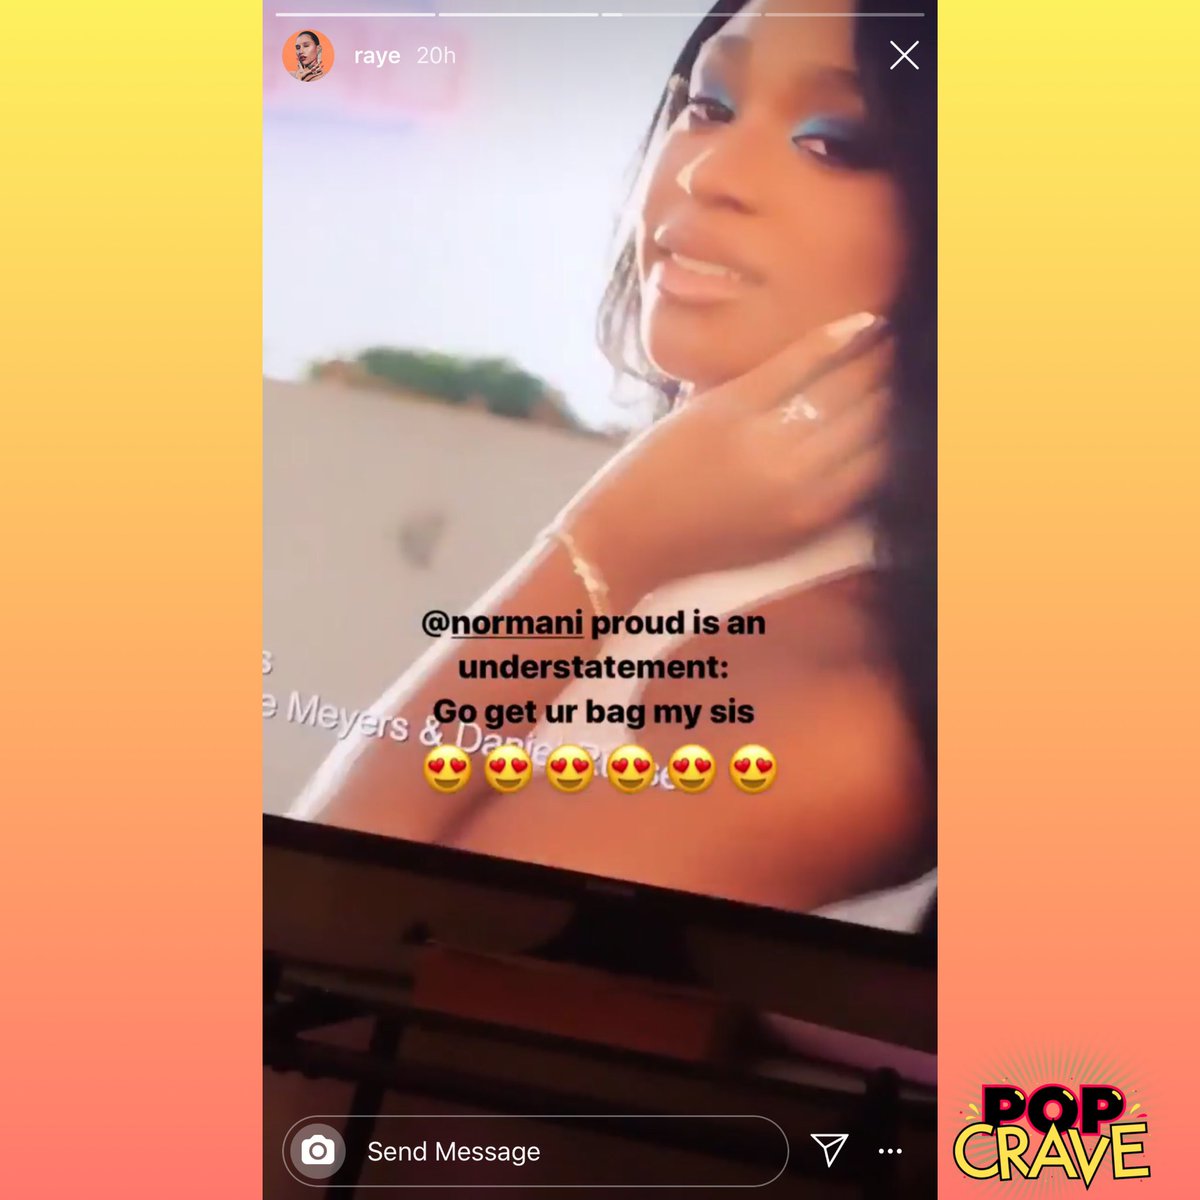 . @Raye reacts to Normani’s “Motivation” music video:“ @Normani proud is an understatement: Go get ur bag my sis”